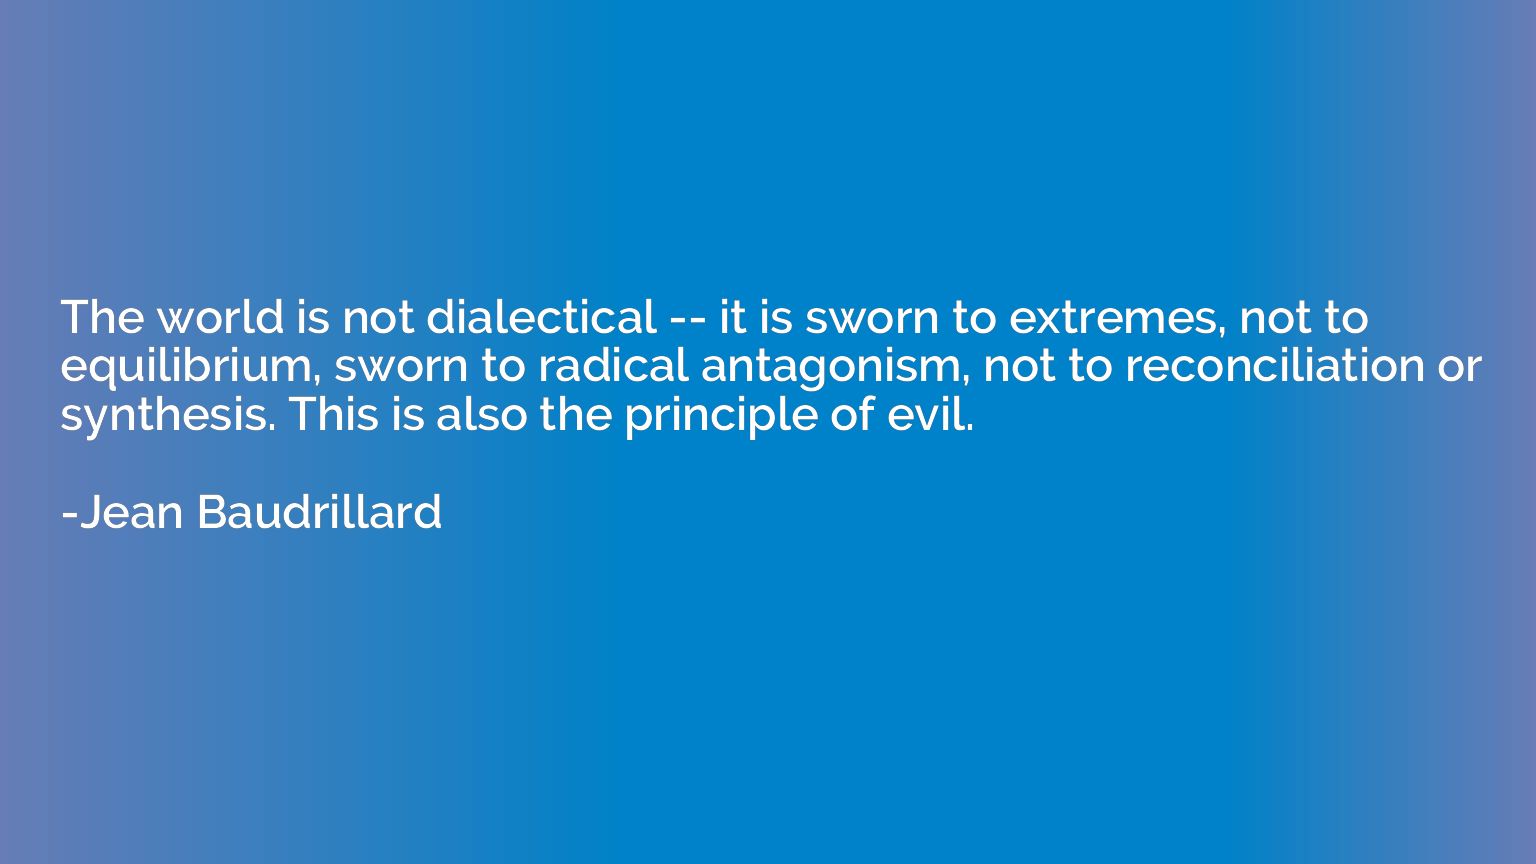 The world is not dialectical -- it is sworn to extremes, not